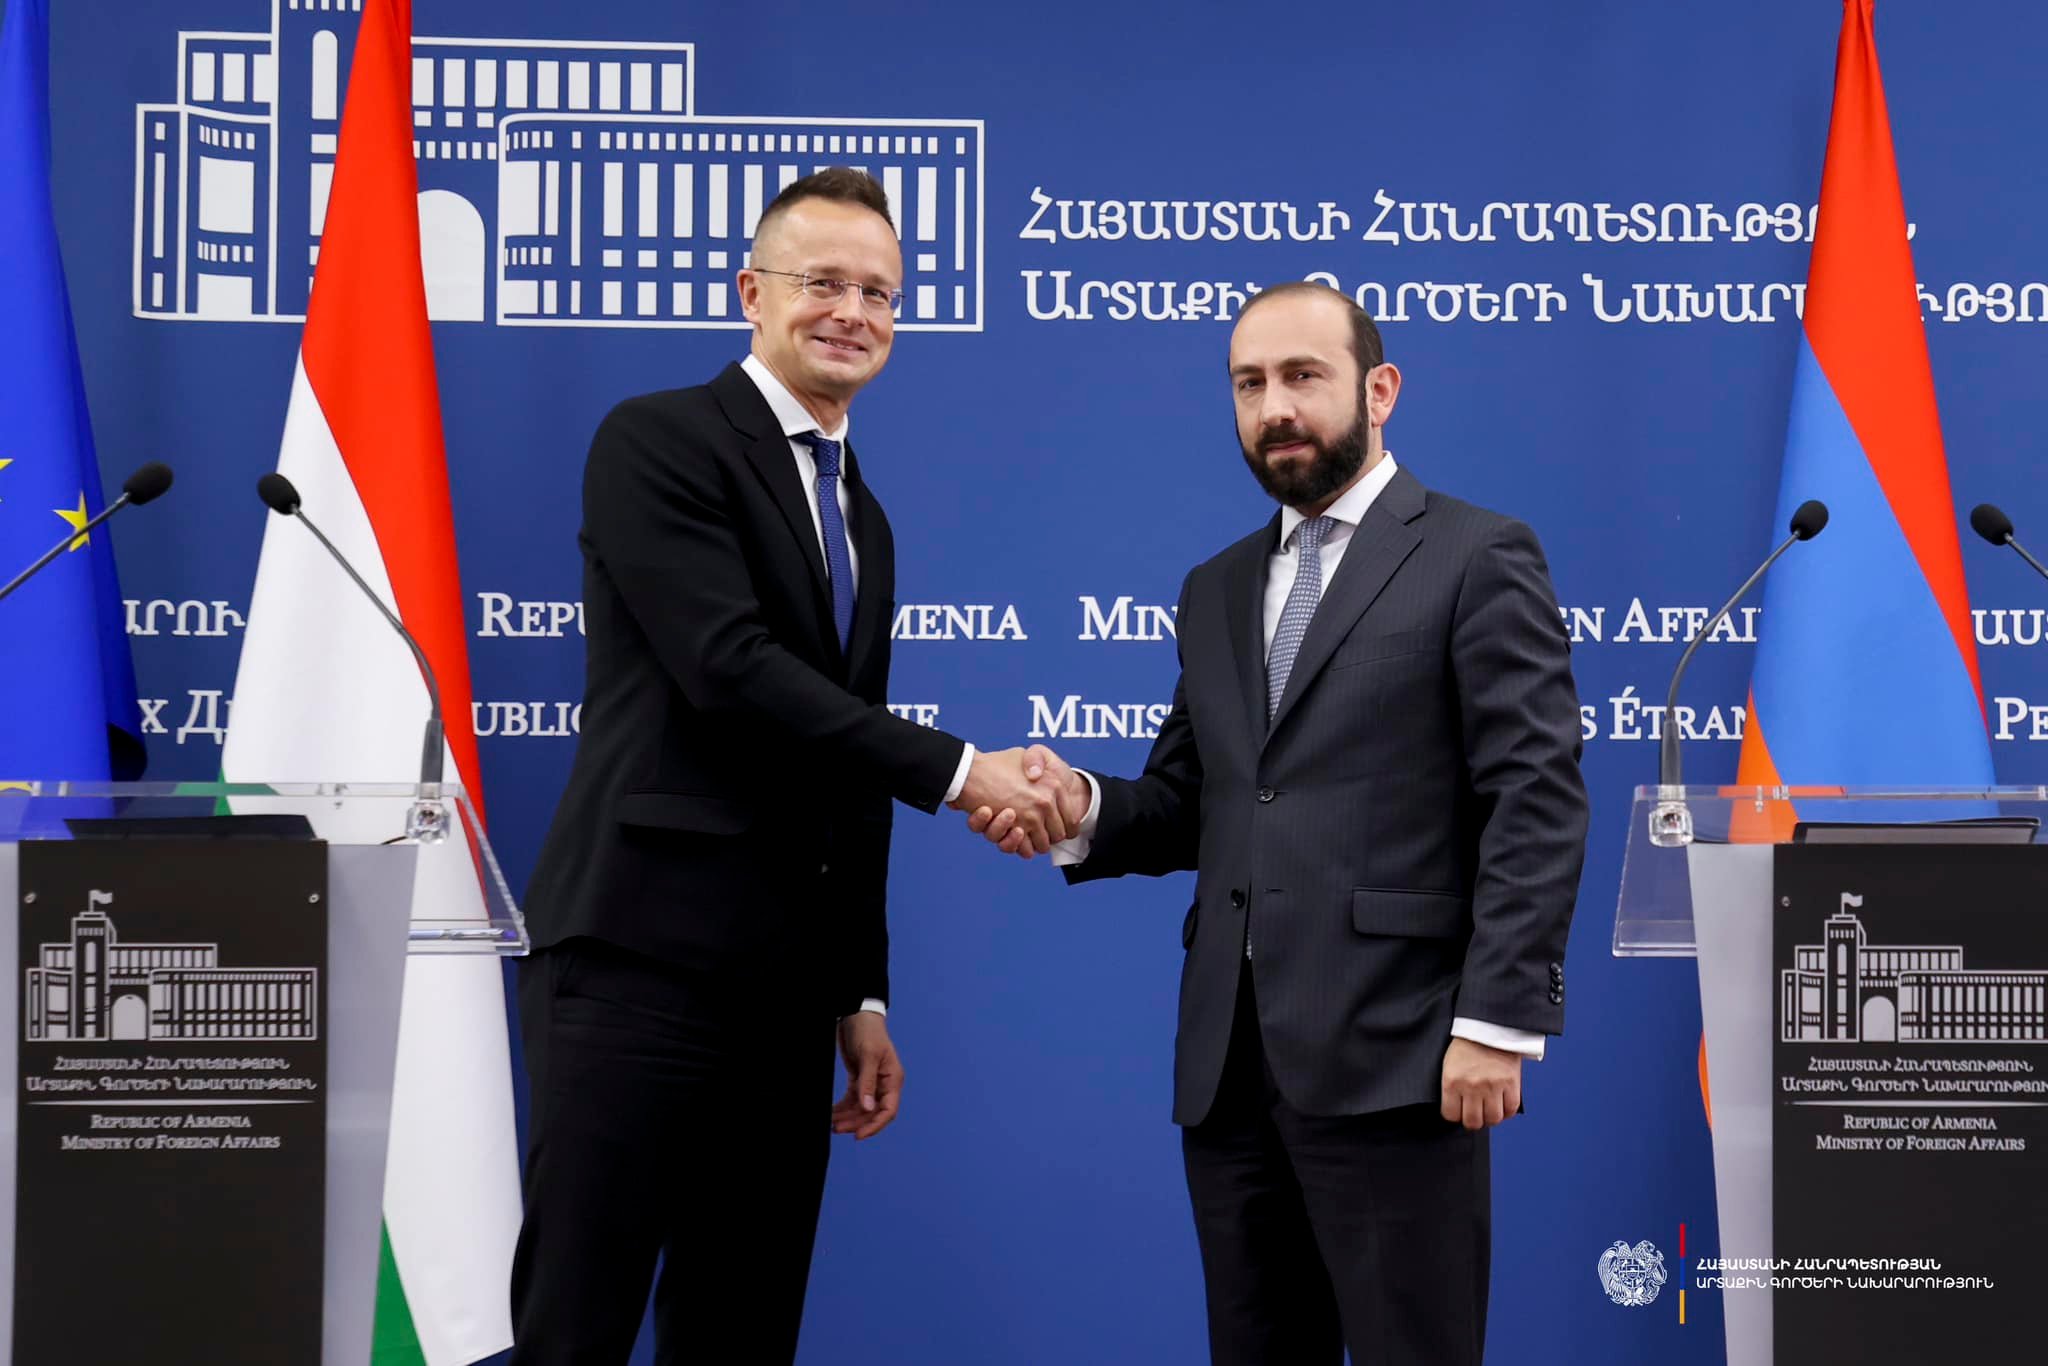 Press Statement of the Minister of Foreign Affairs of Armenia Ararat Mirzoyan during the joint press conference with the Minister of Foreign Affairs of Hungary